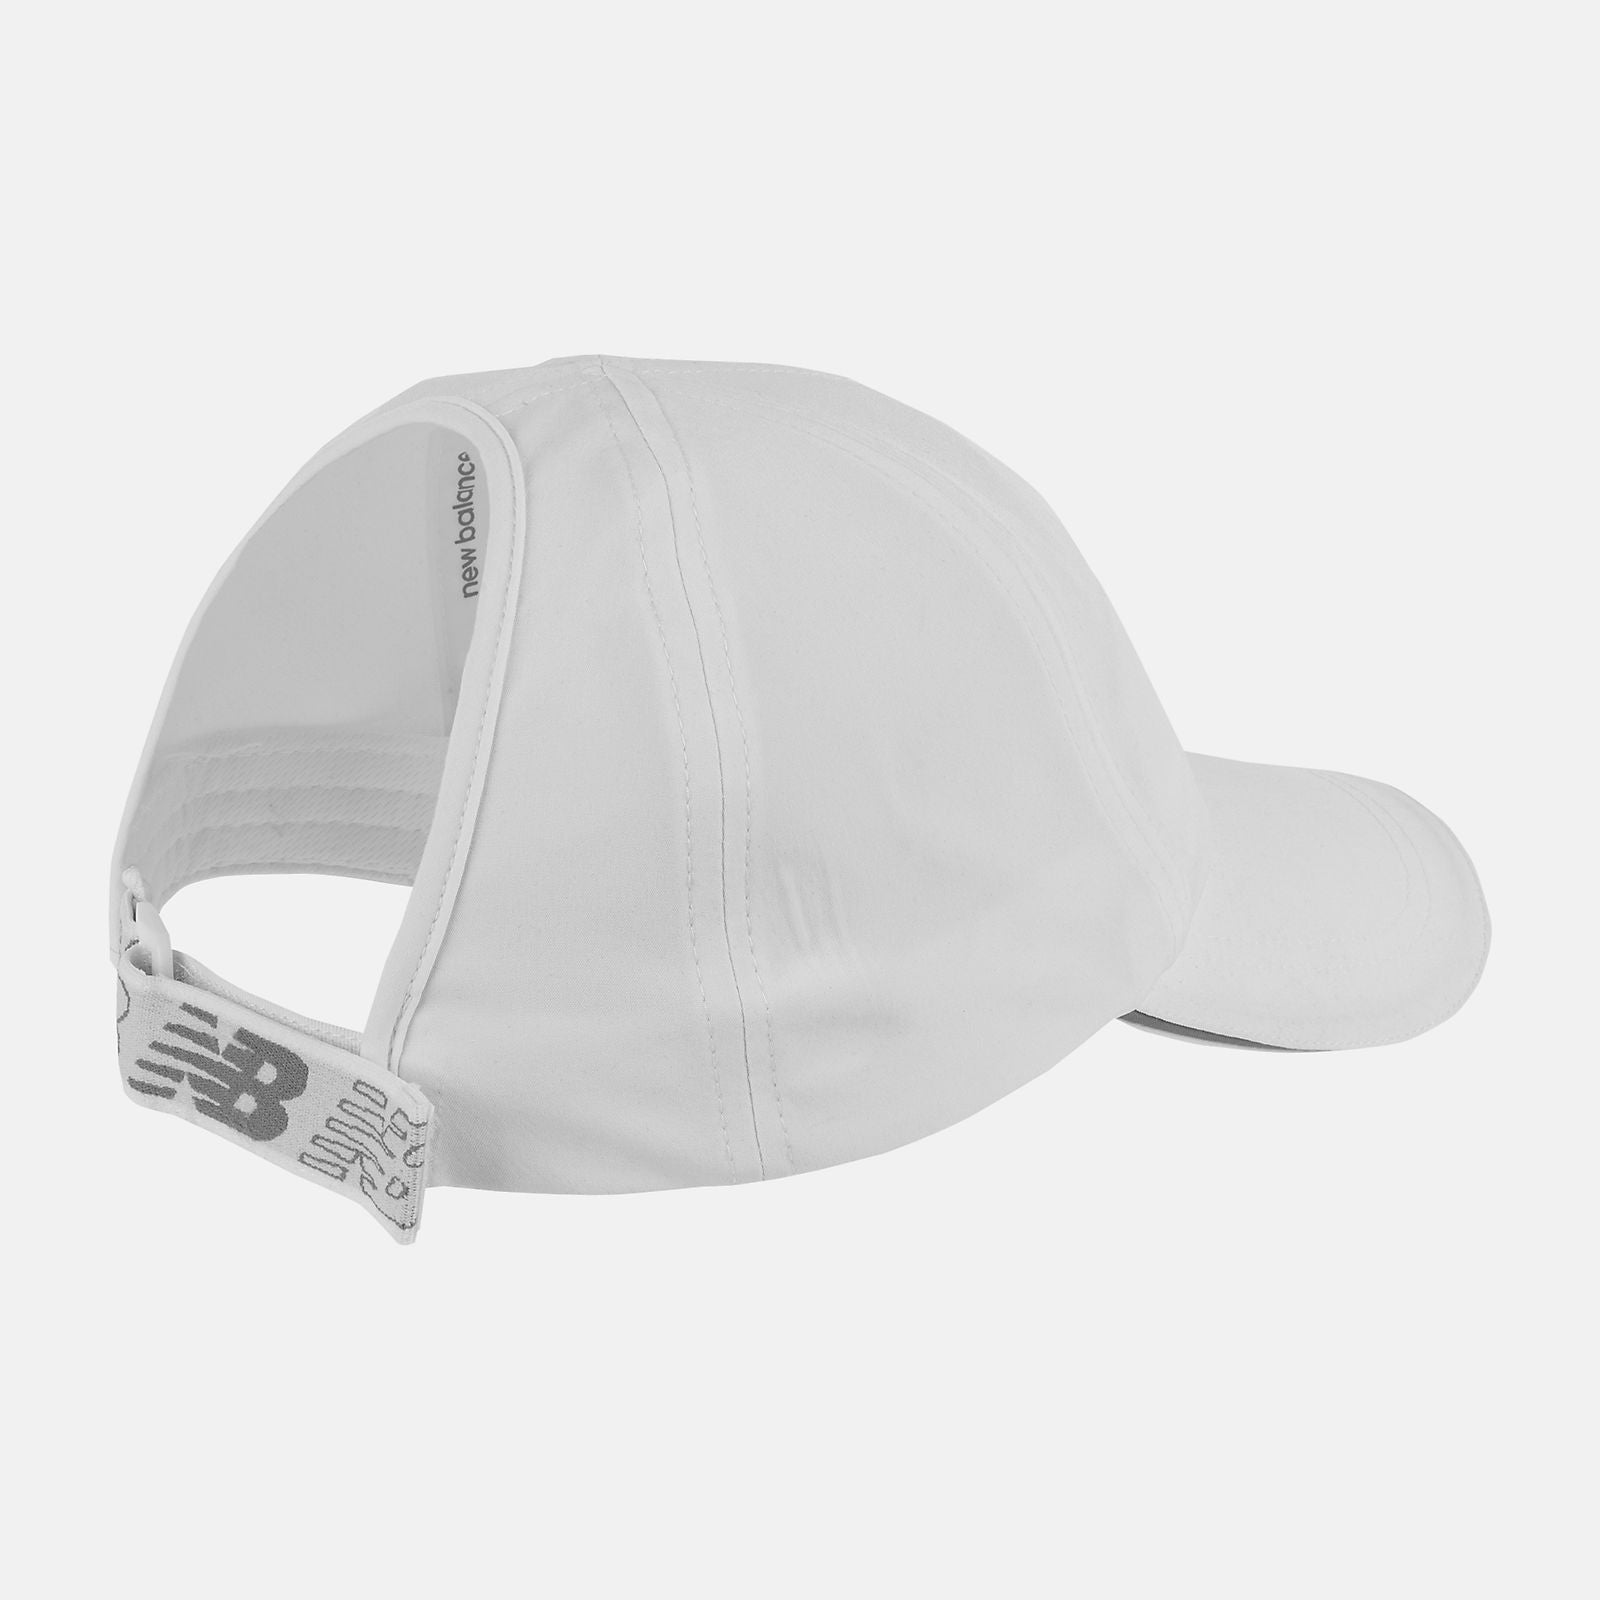 NEW BALANCE Women's High Pony Performance Hat in White LAH21103 O/S WHITE FROM EIGHTYWINGOLD - OFFICIAL BRAND PARTNER